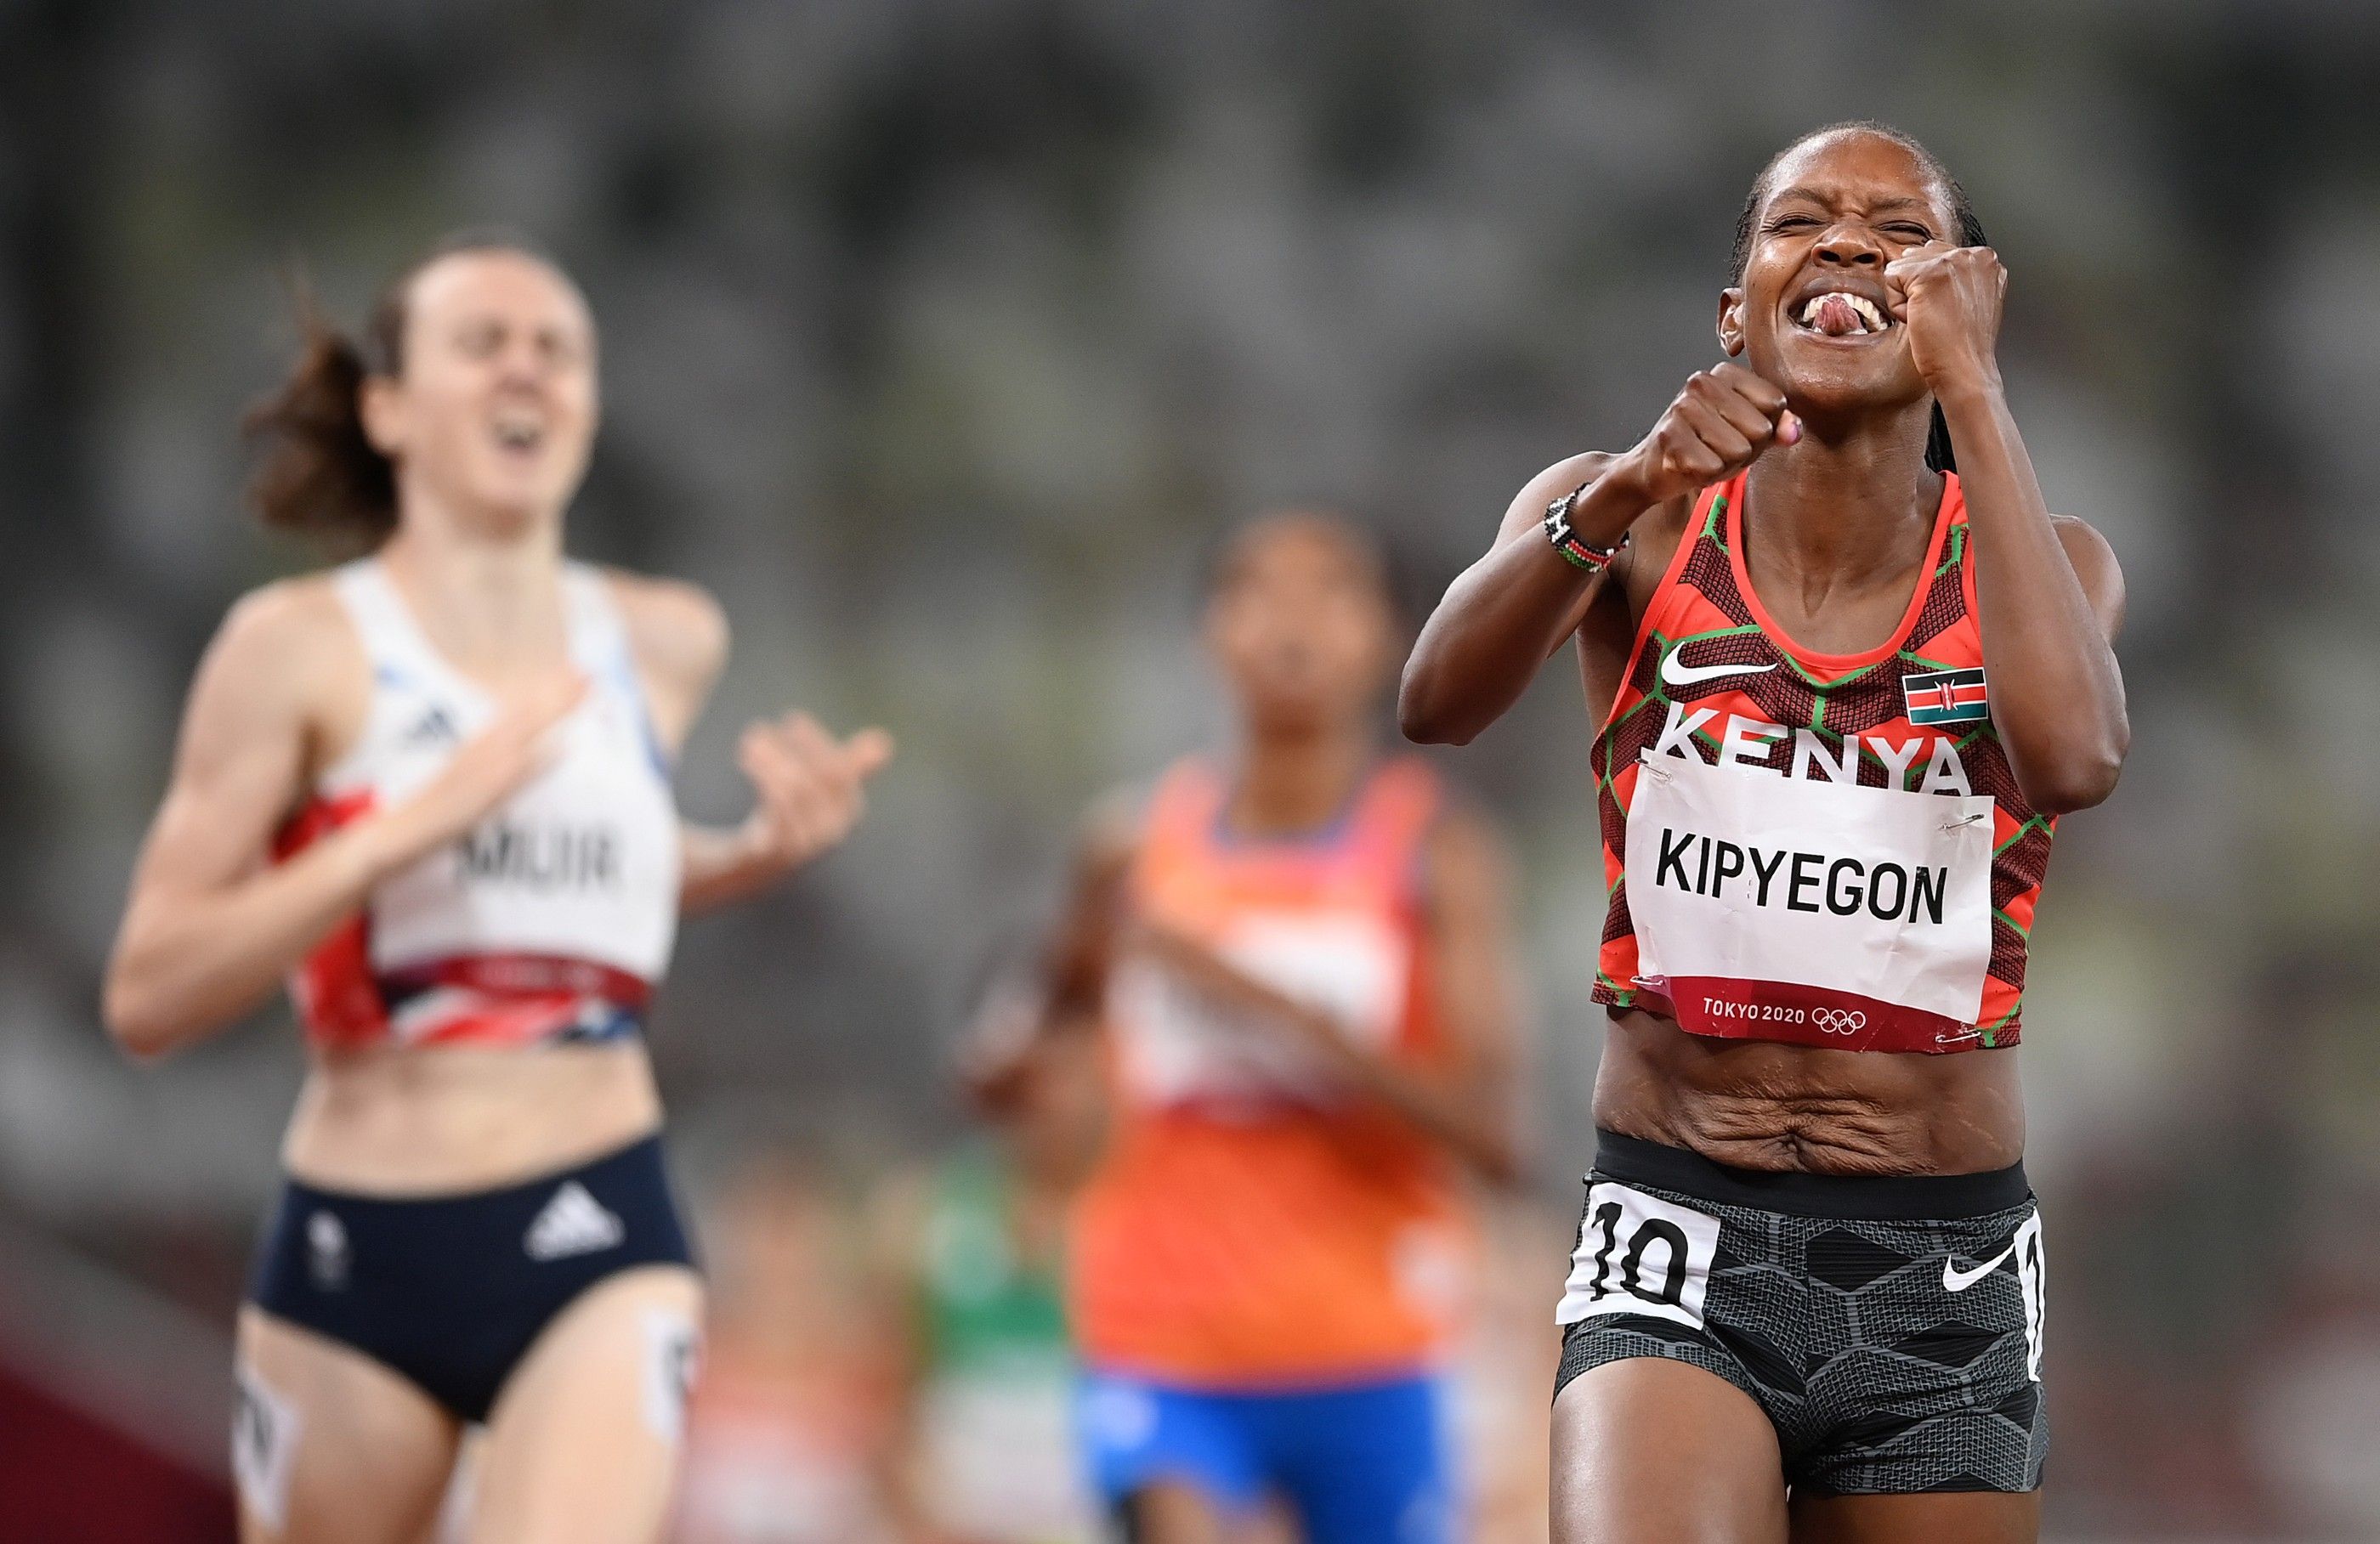 Faith Kipyegon celebrates her 1500m win at the Tokyo 2020 Olympic Games